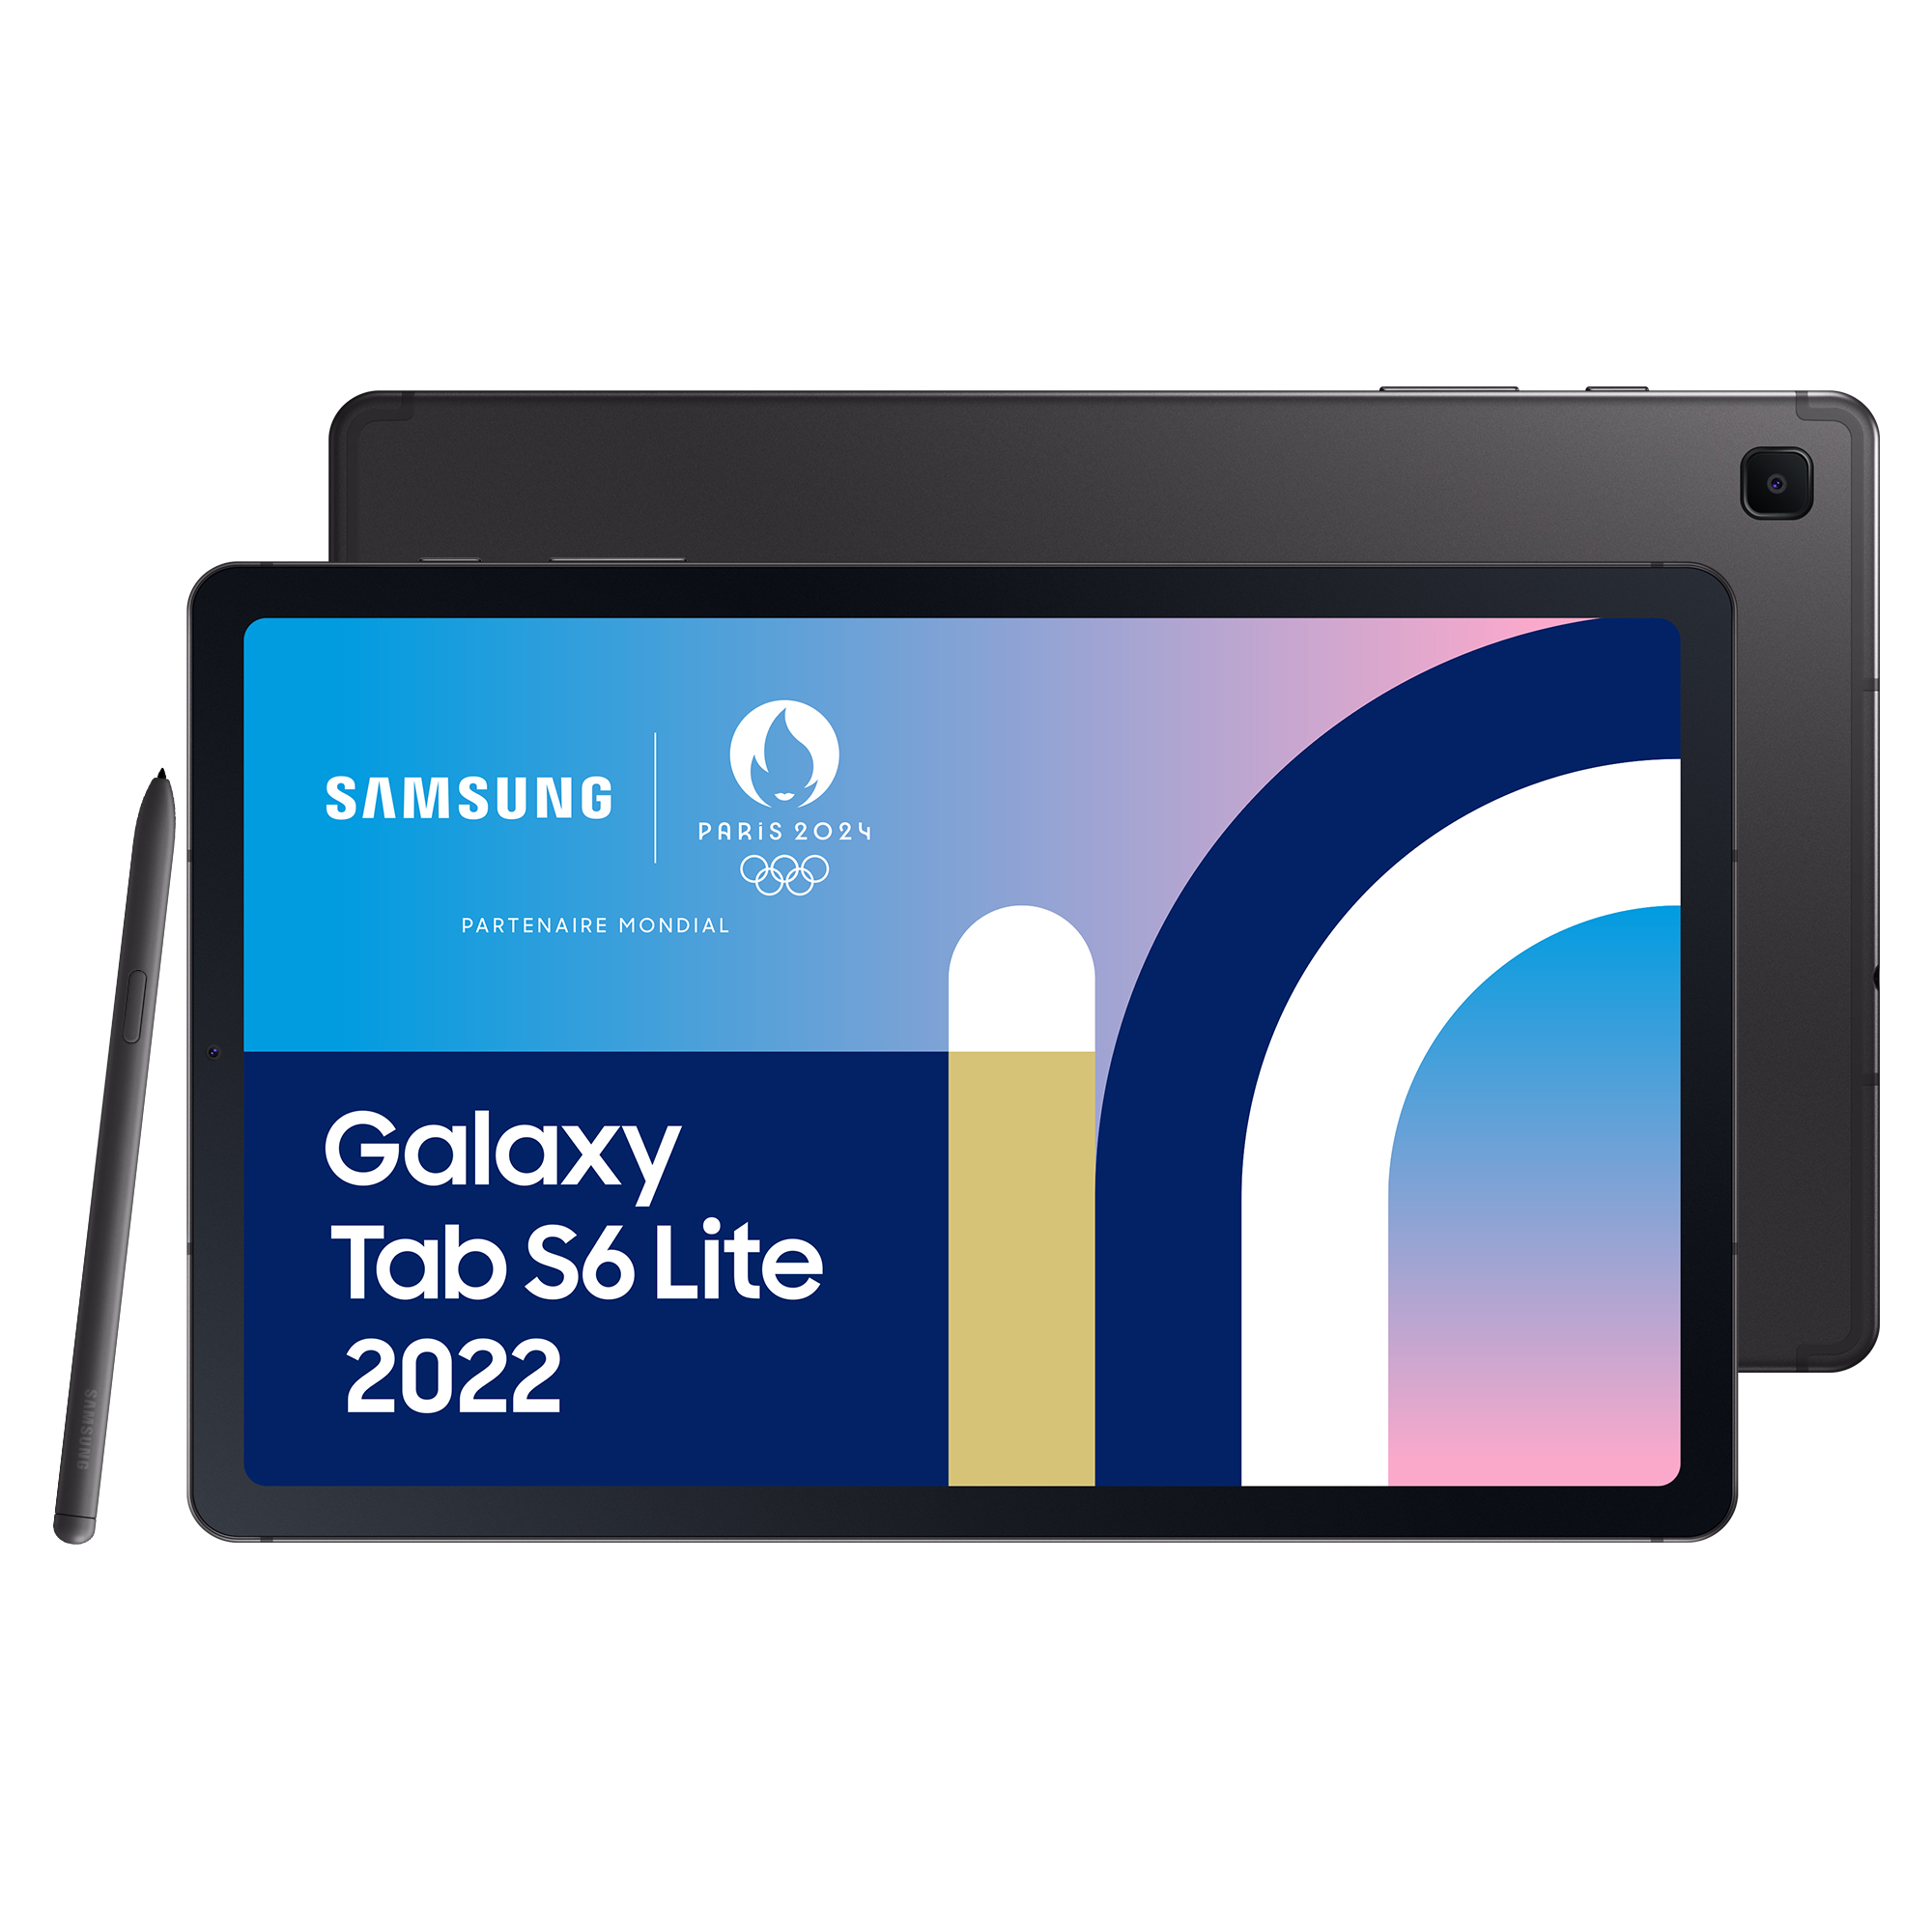 SAMSUNG Tablette Android Galaxy Tab S6 Lite 2022 10.4 64Go - Anthracite  pas cher 